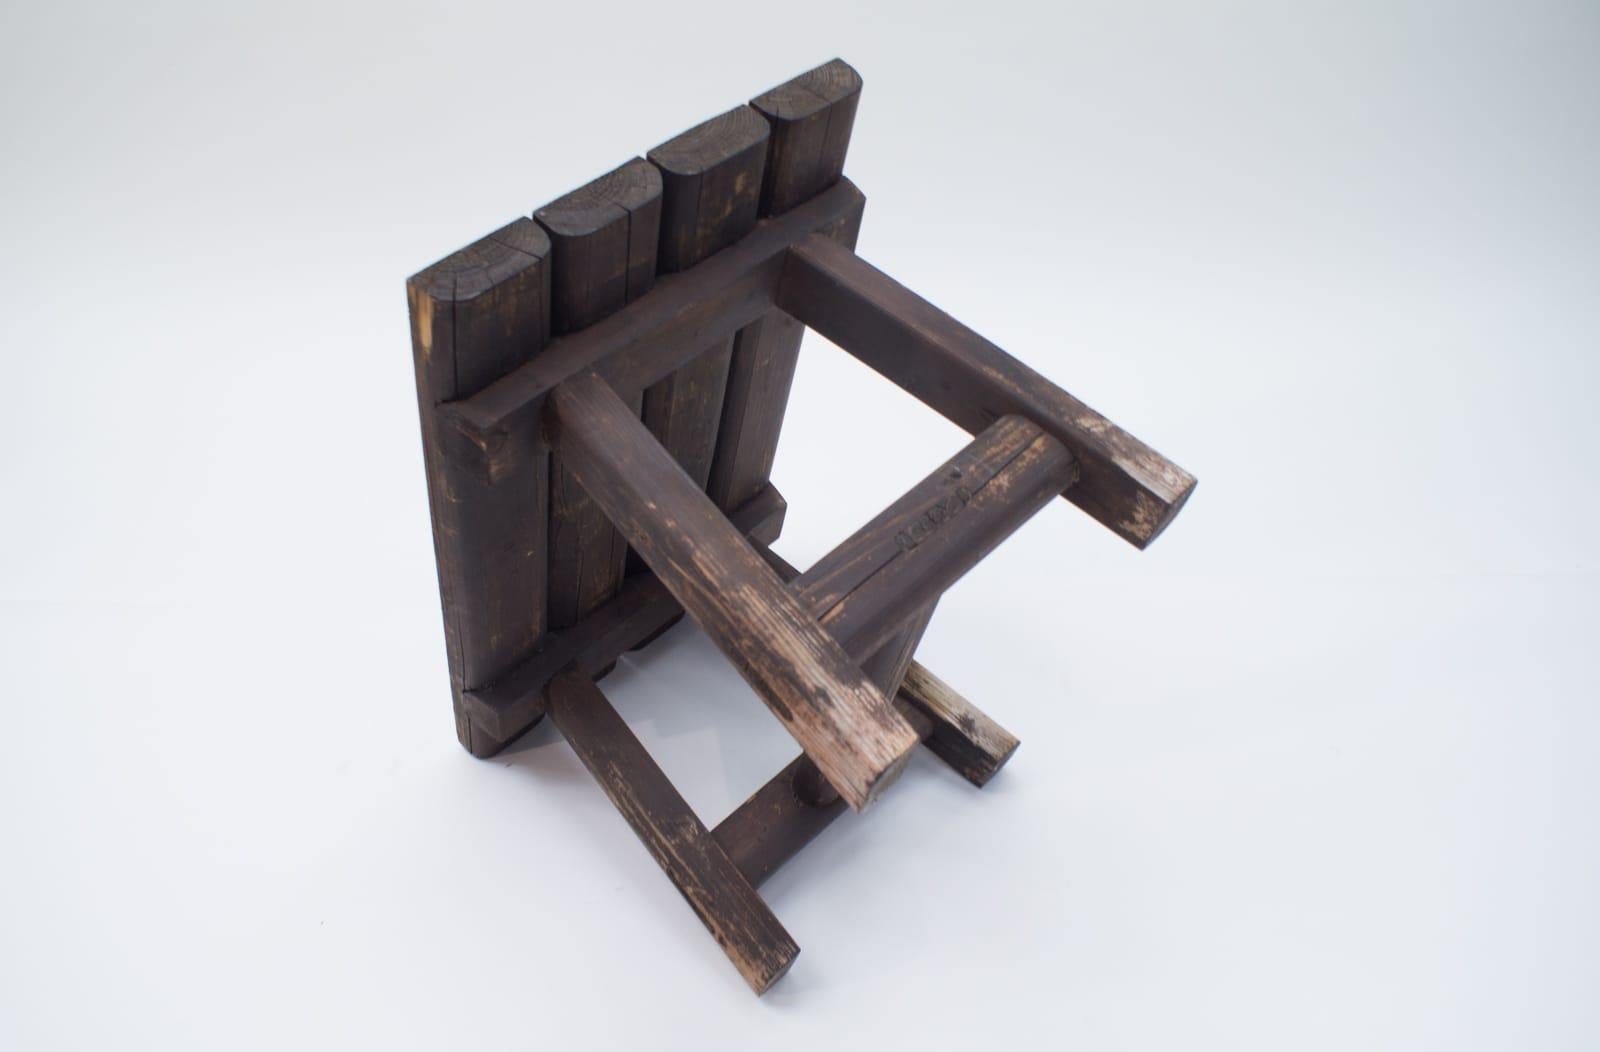 Black Forest Wooden Bench, 1930s-1940s Germany 9